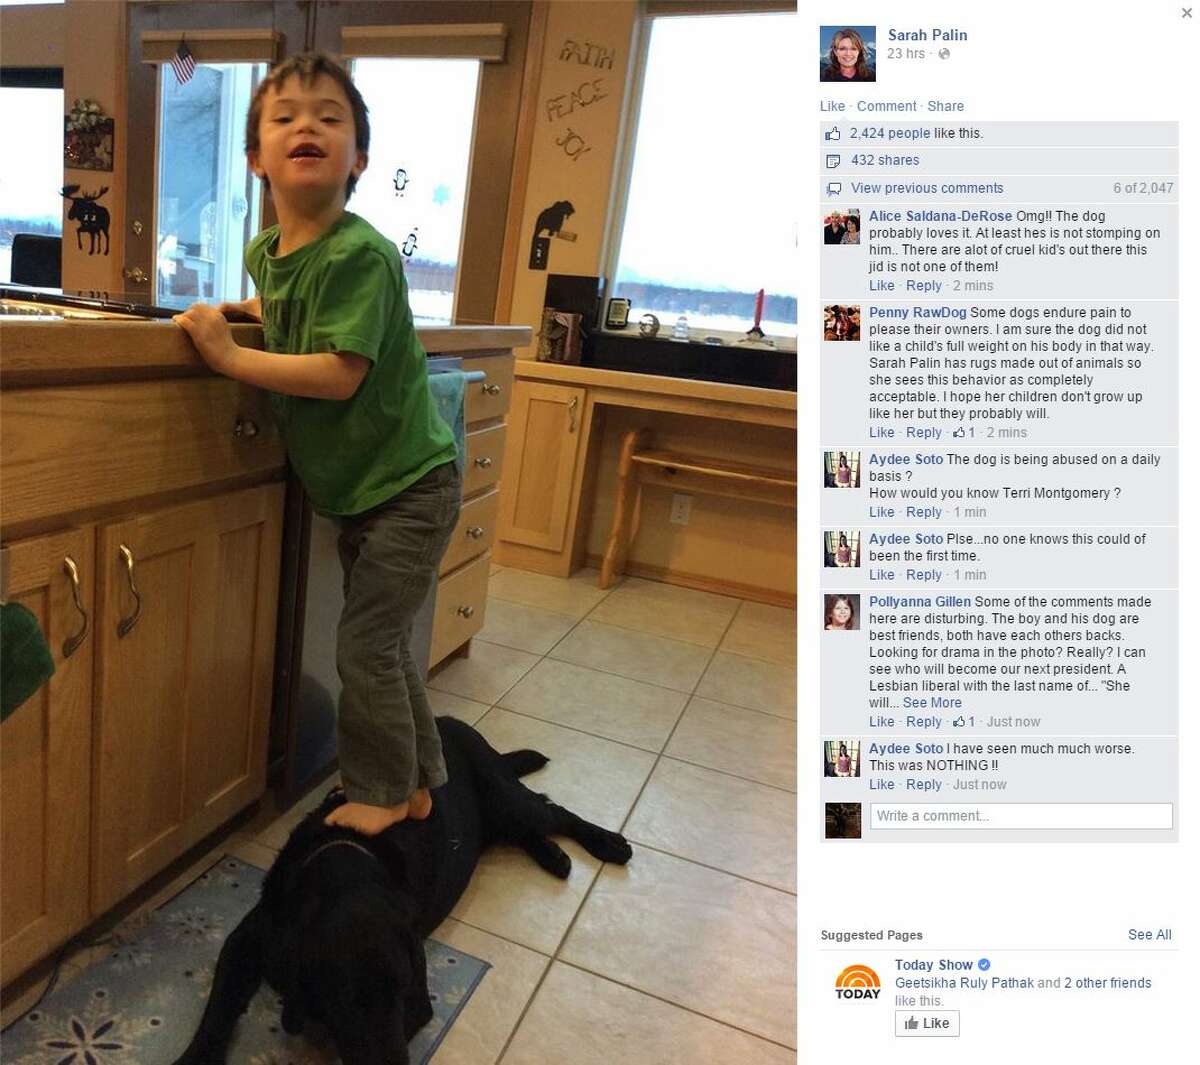 Sarah Palin, former Republican vice presidential candidate, has drawn outrage over a New Year's Day Facebook post showing her son Trig standing on the family dog.